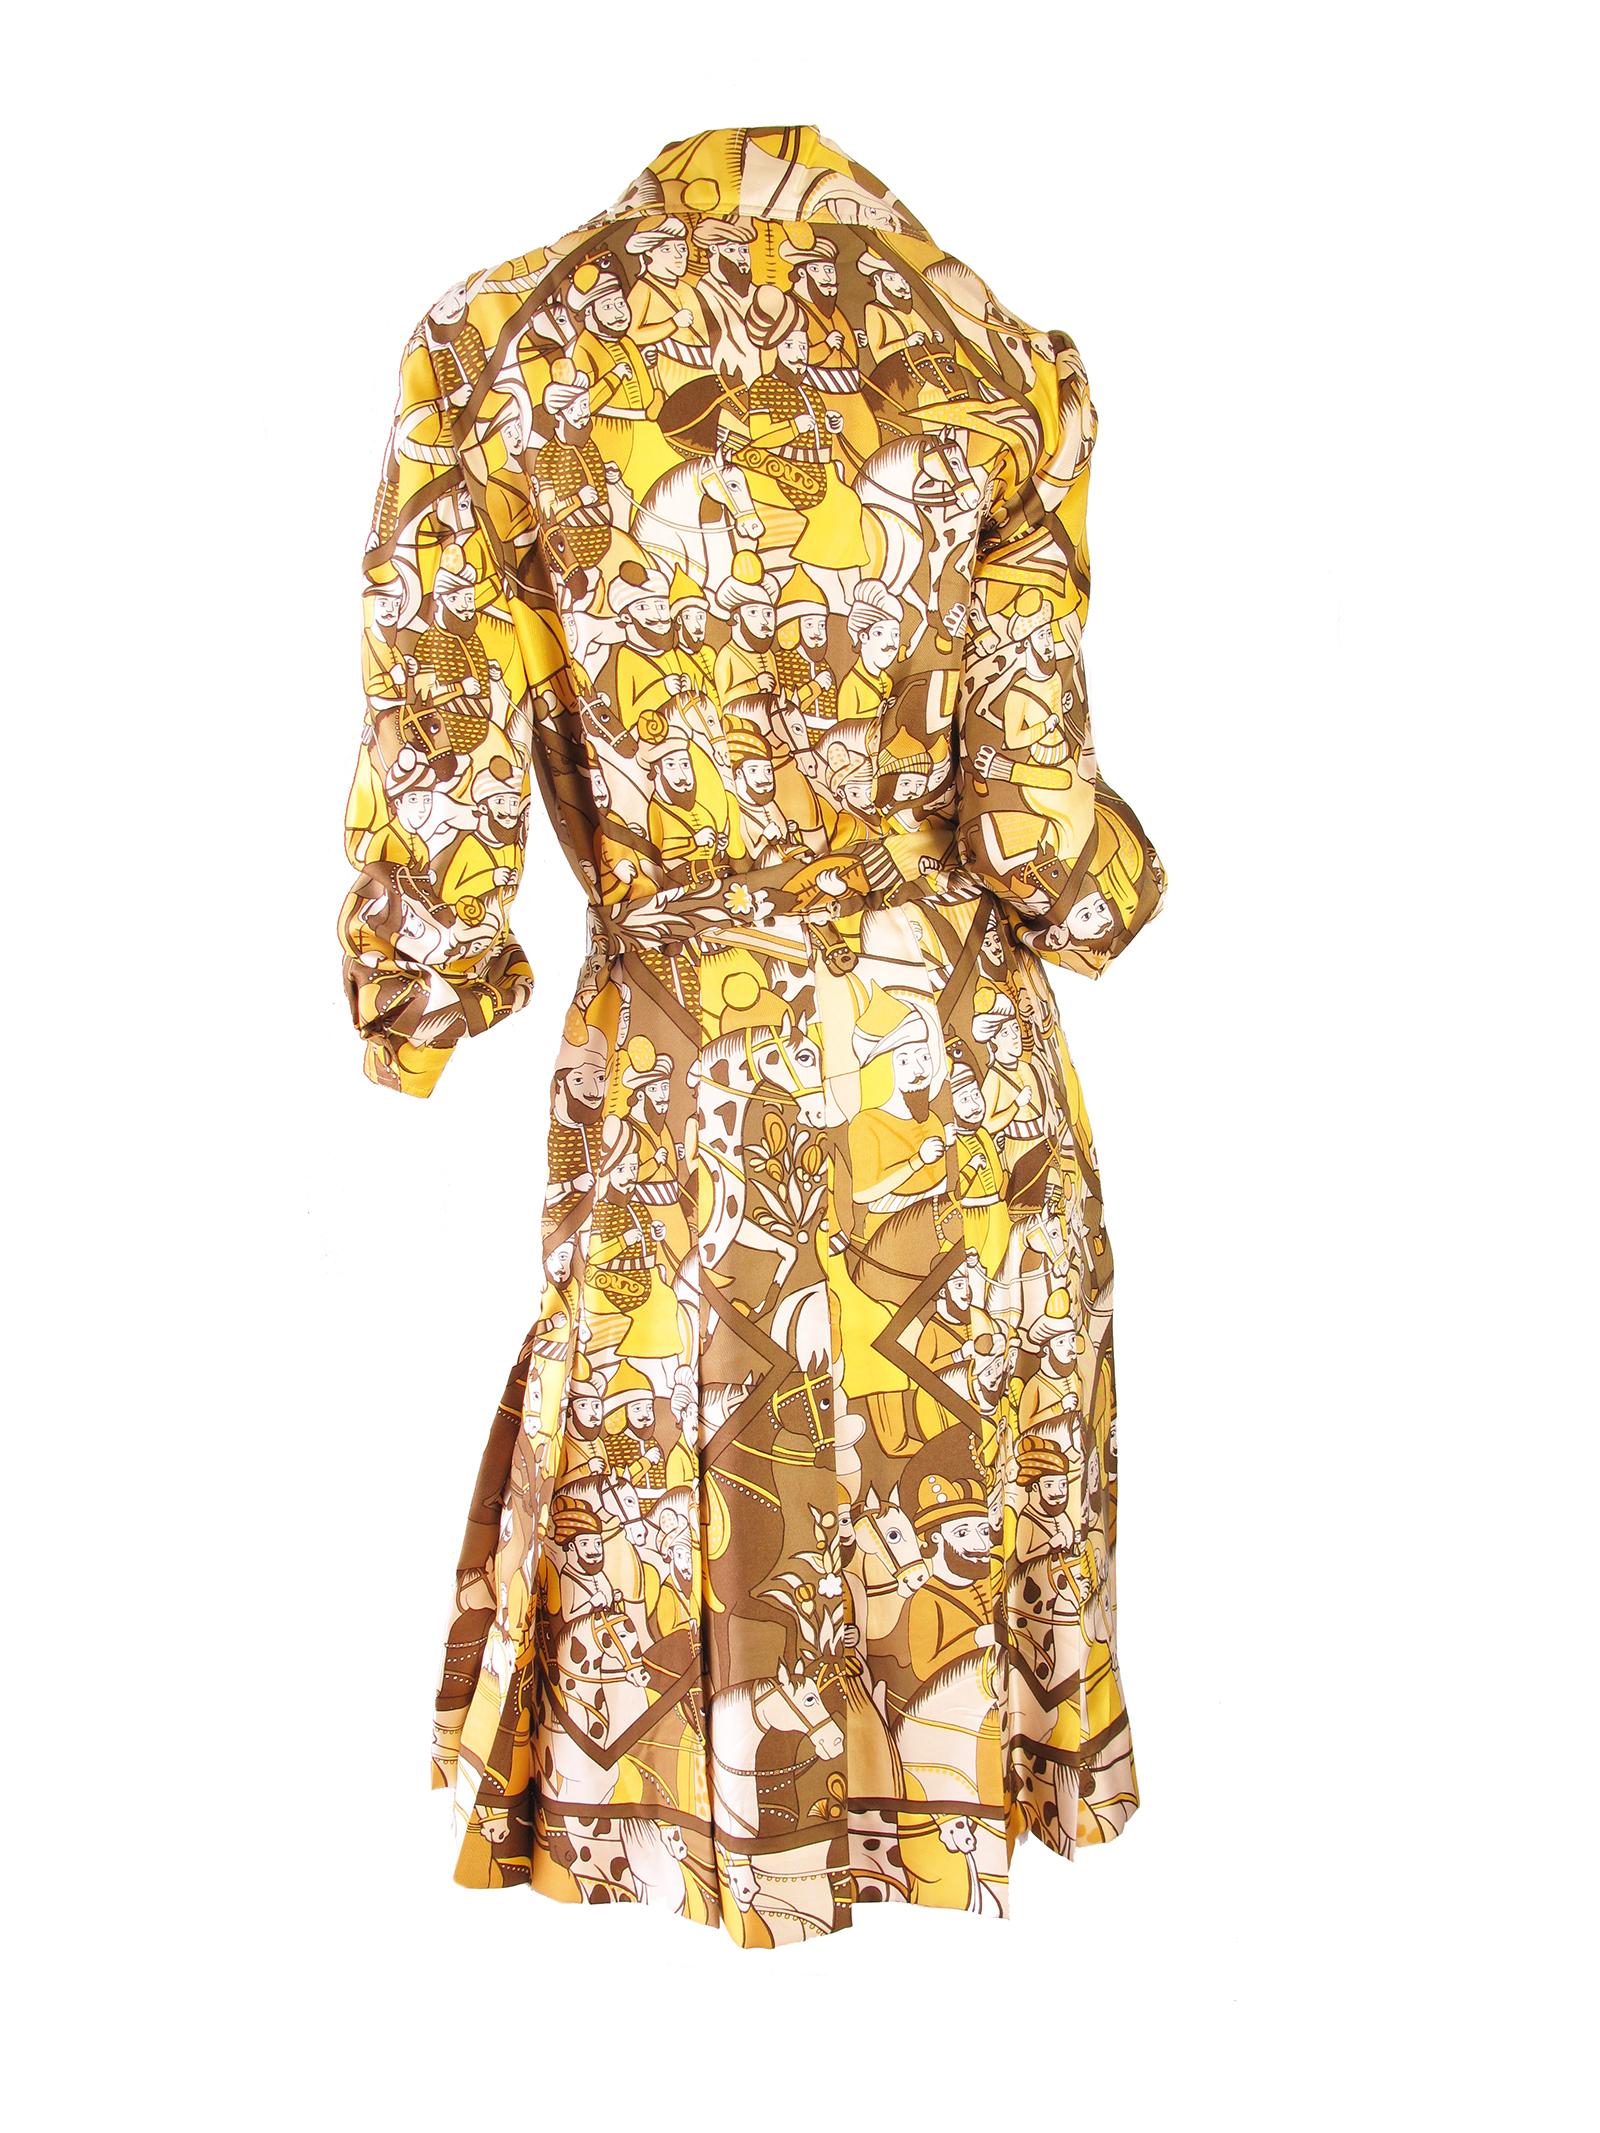 1970s Hermes silk printed dress with removable belt.  Condition: Very good, spot and pull on collar, see photos. Size 8 - 10

We accept returns for refund, please see our terms.  We offer free ground shipping within the US